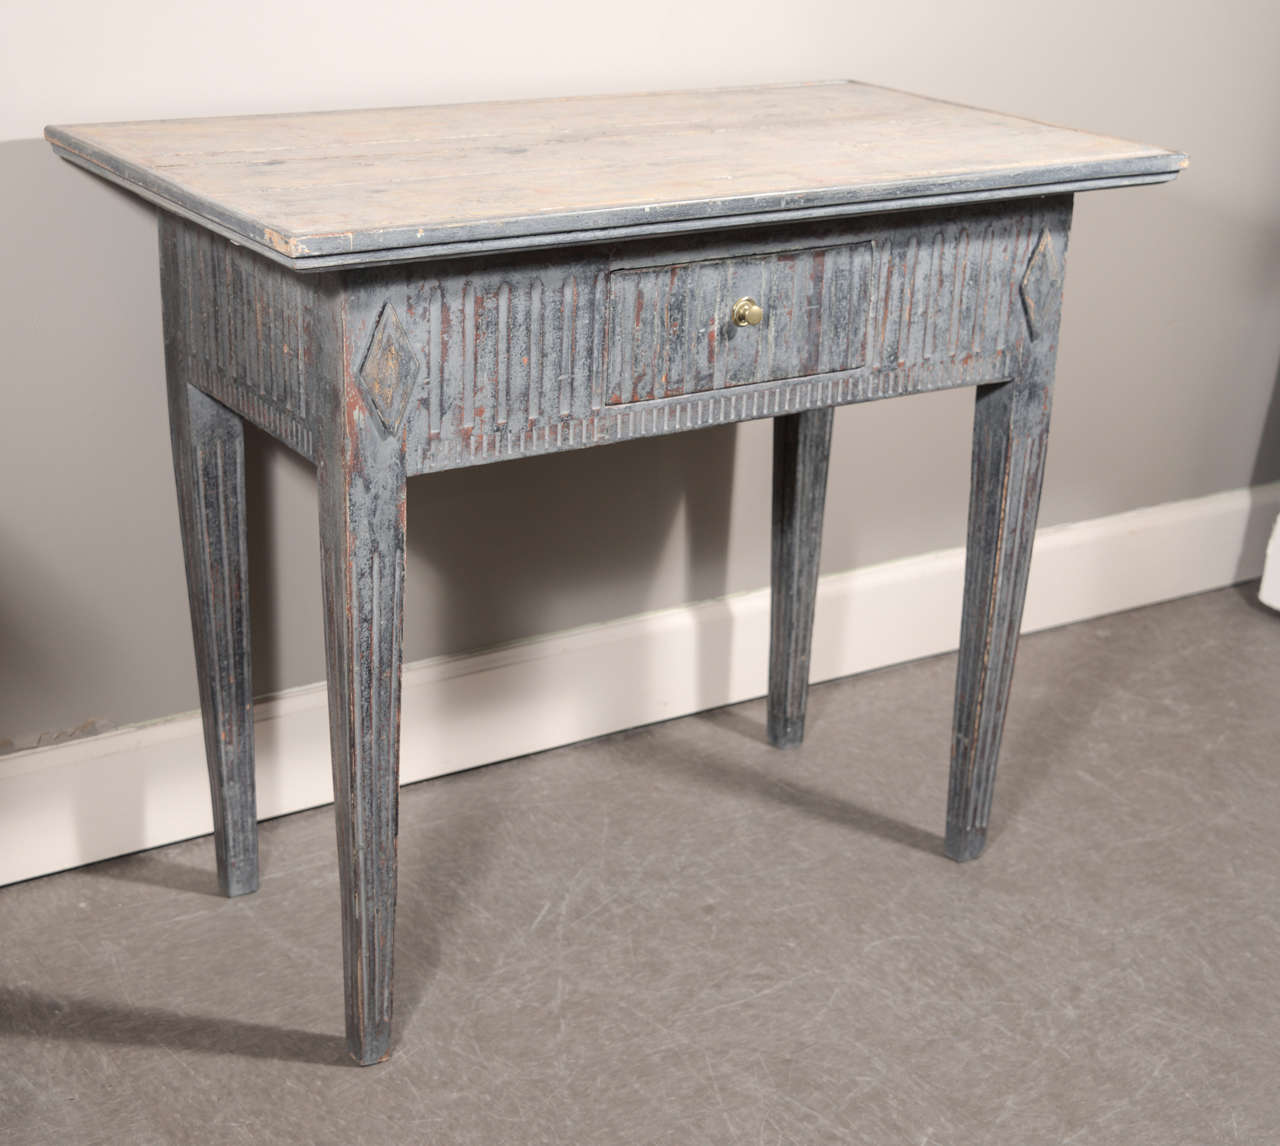 Side table with deep overhang. One-drawer. Oxidized dark blue paint, with lighter, worn gray paint on top. Carved reeding characteristic of the Louis XVI period as interpreted by King Gustav, circa 1860.